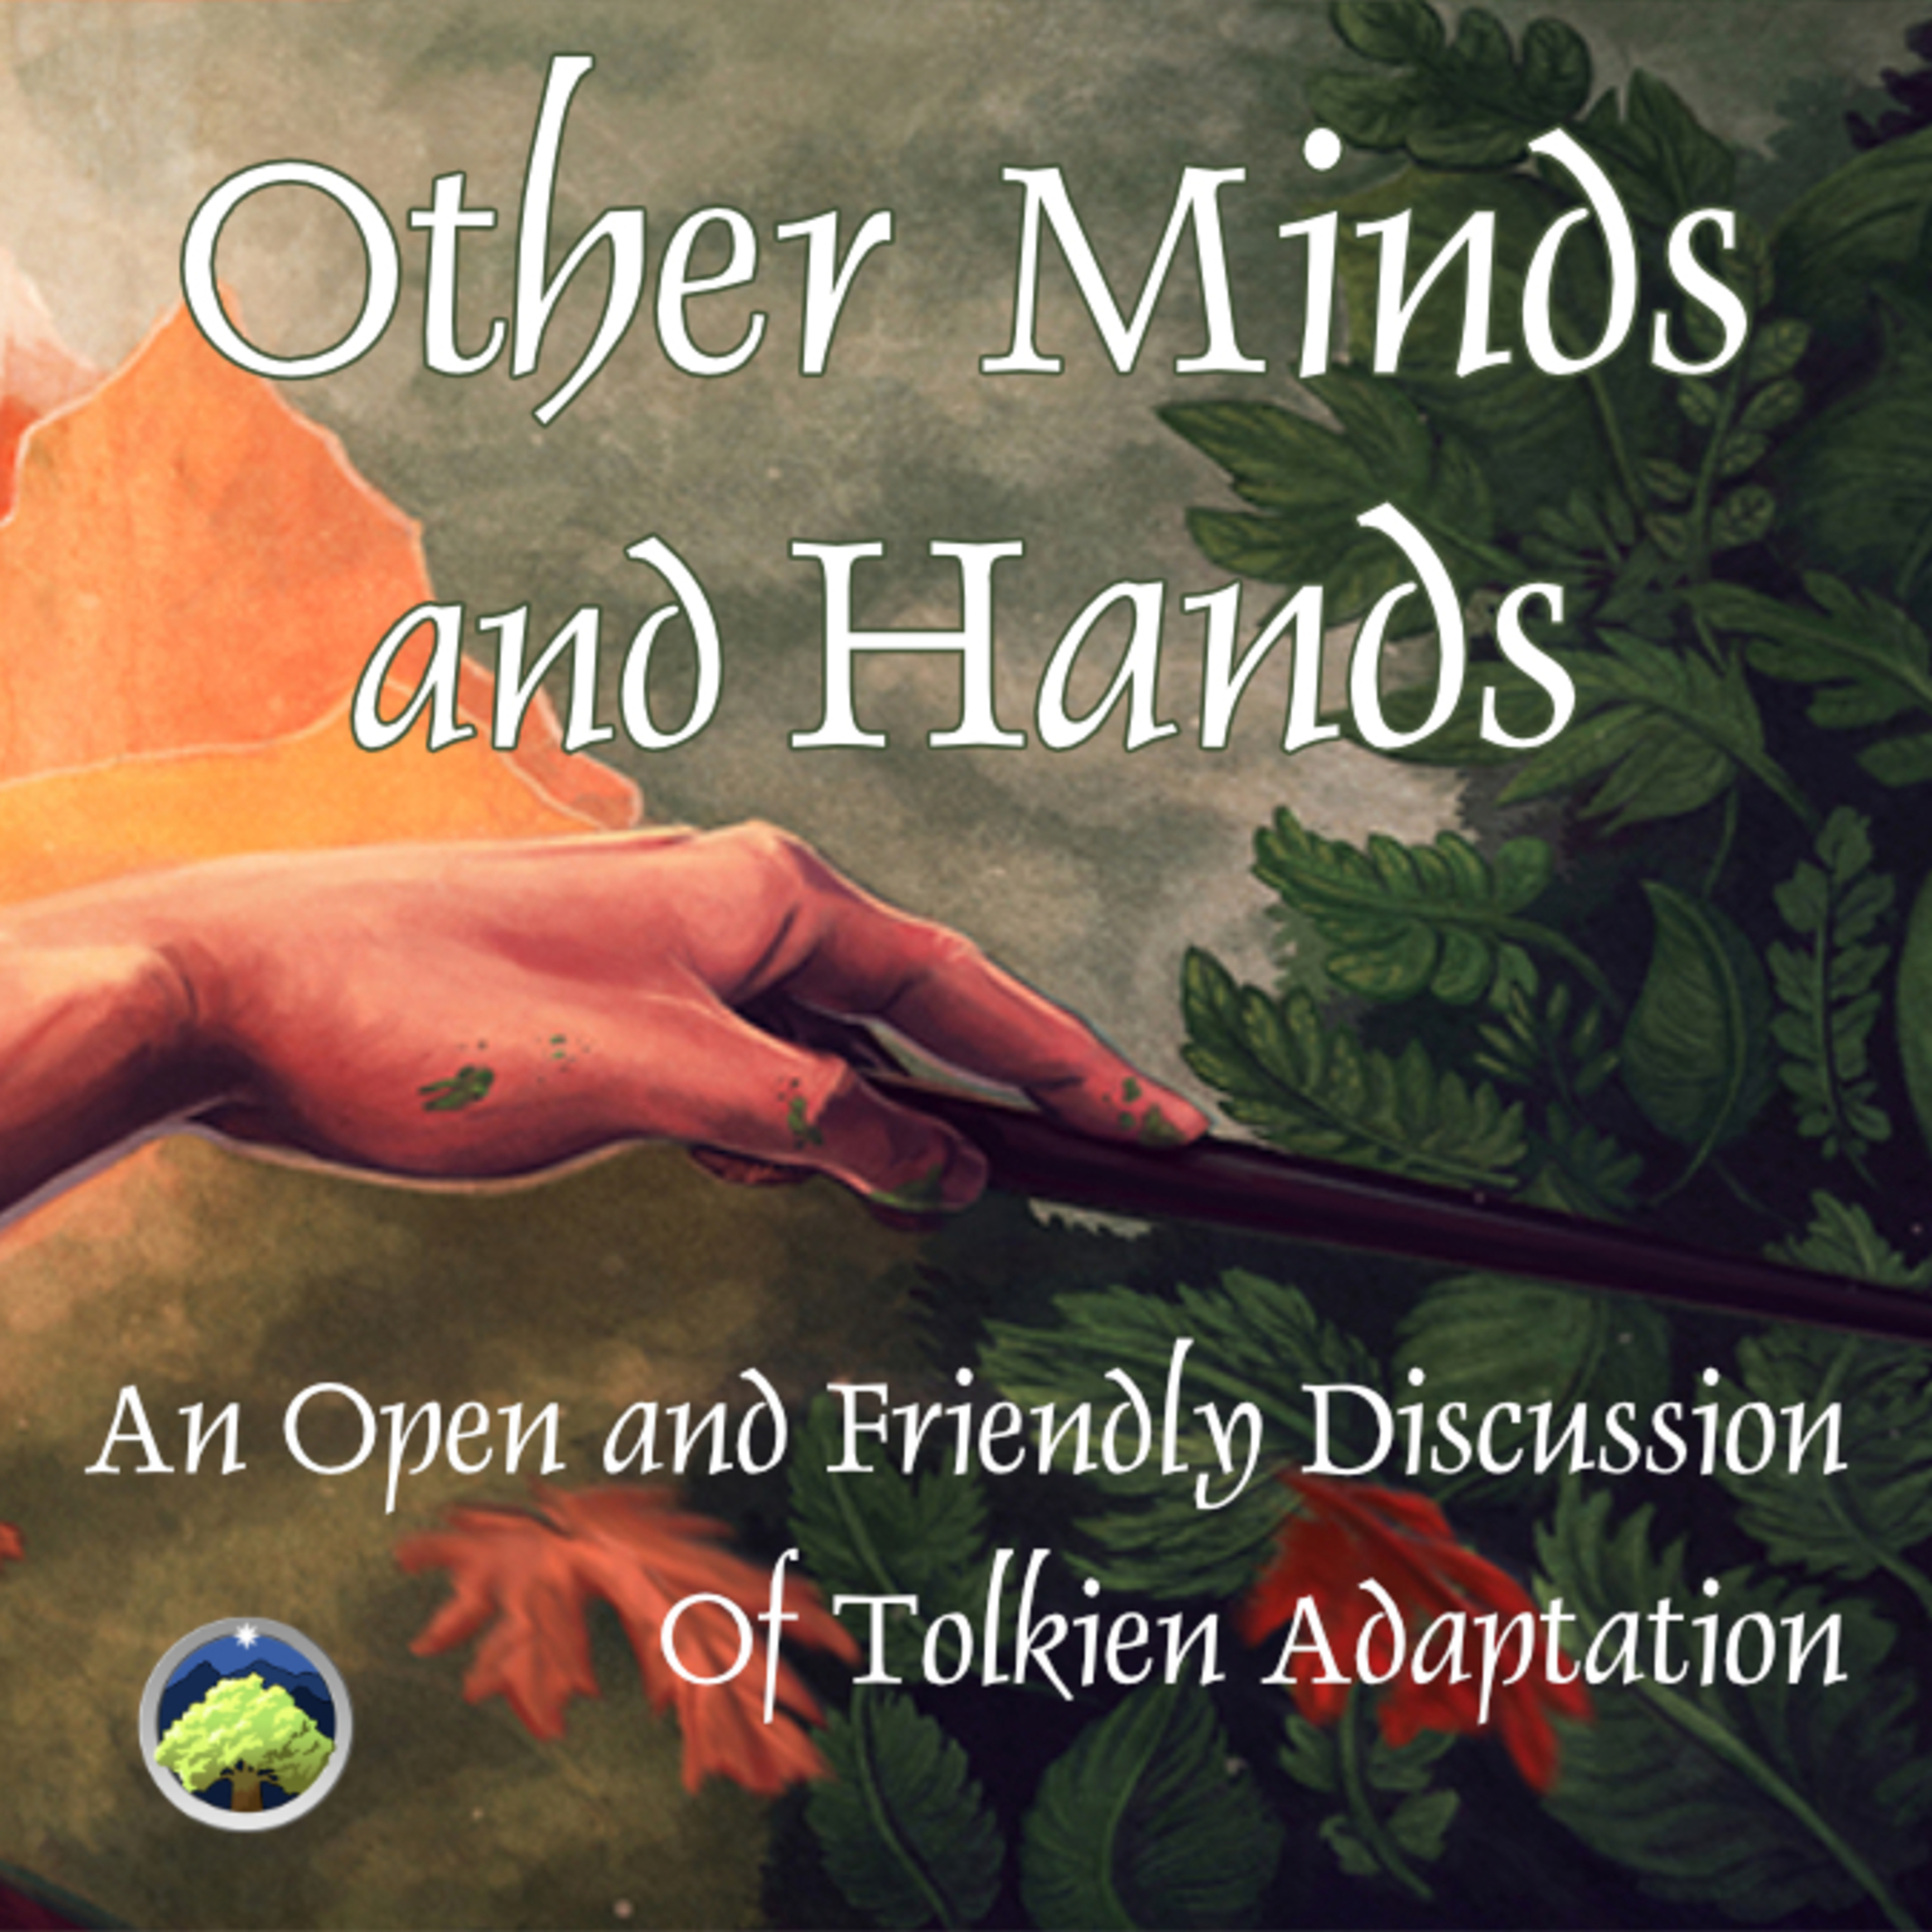 568: Other Minds and Hands, Episode 69